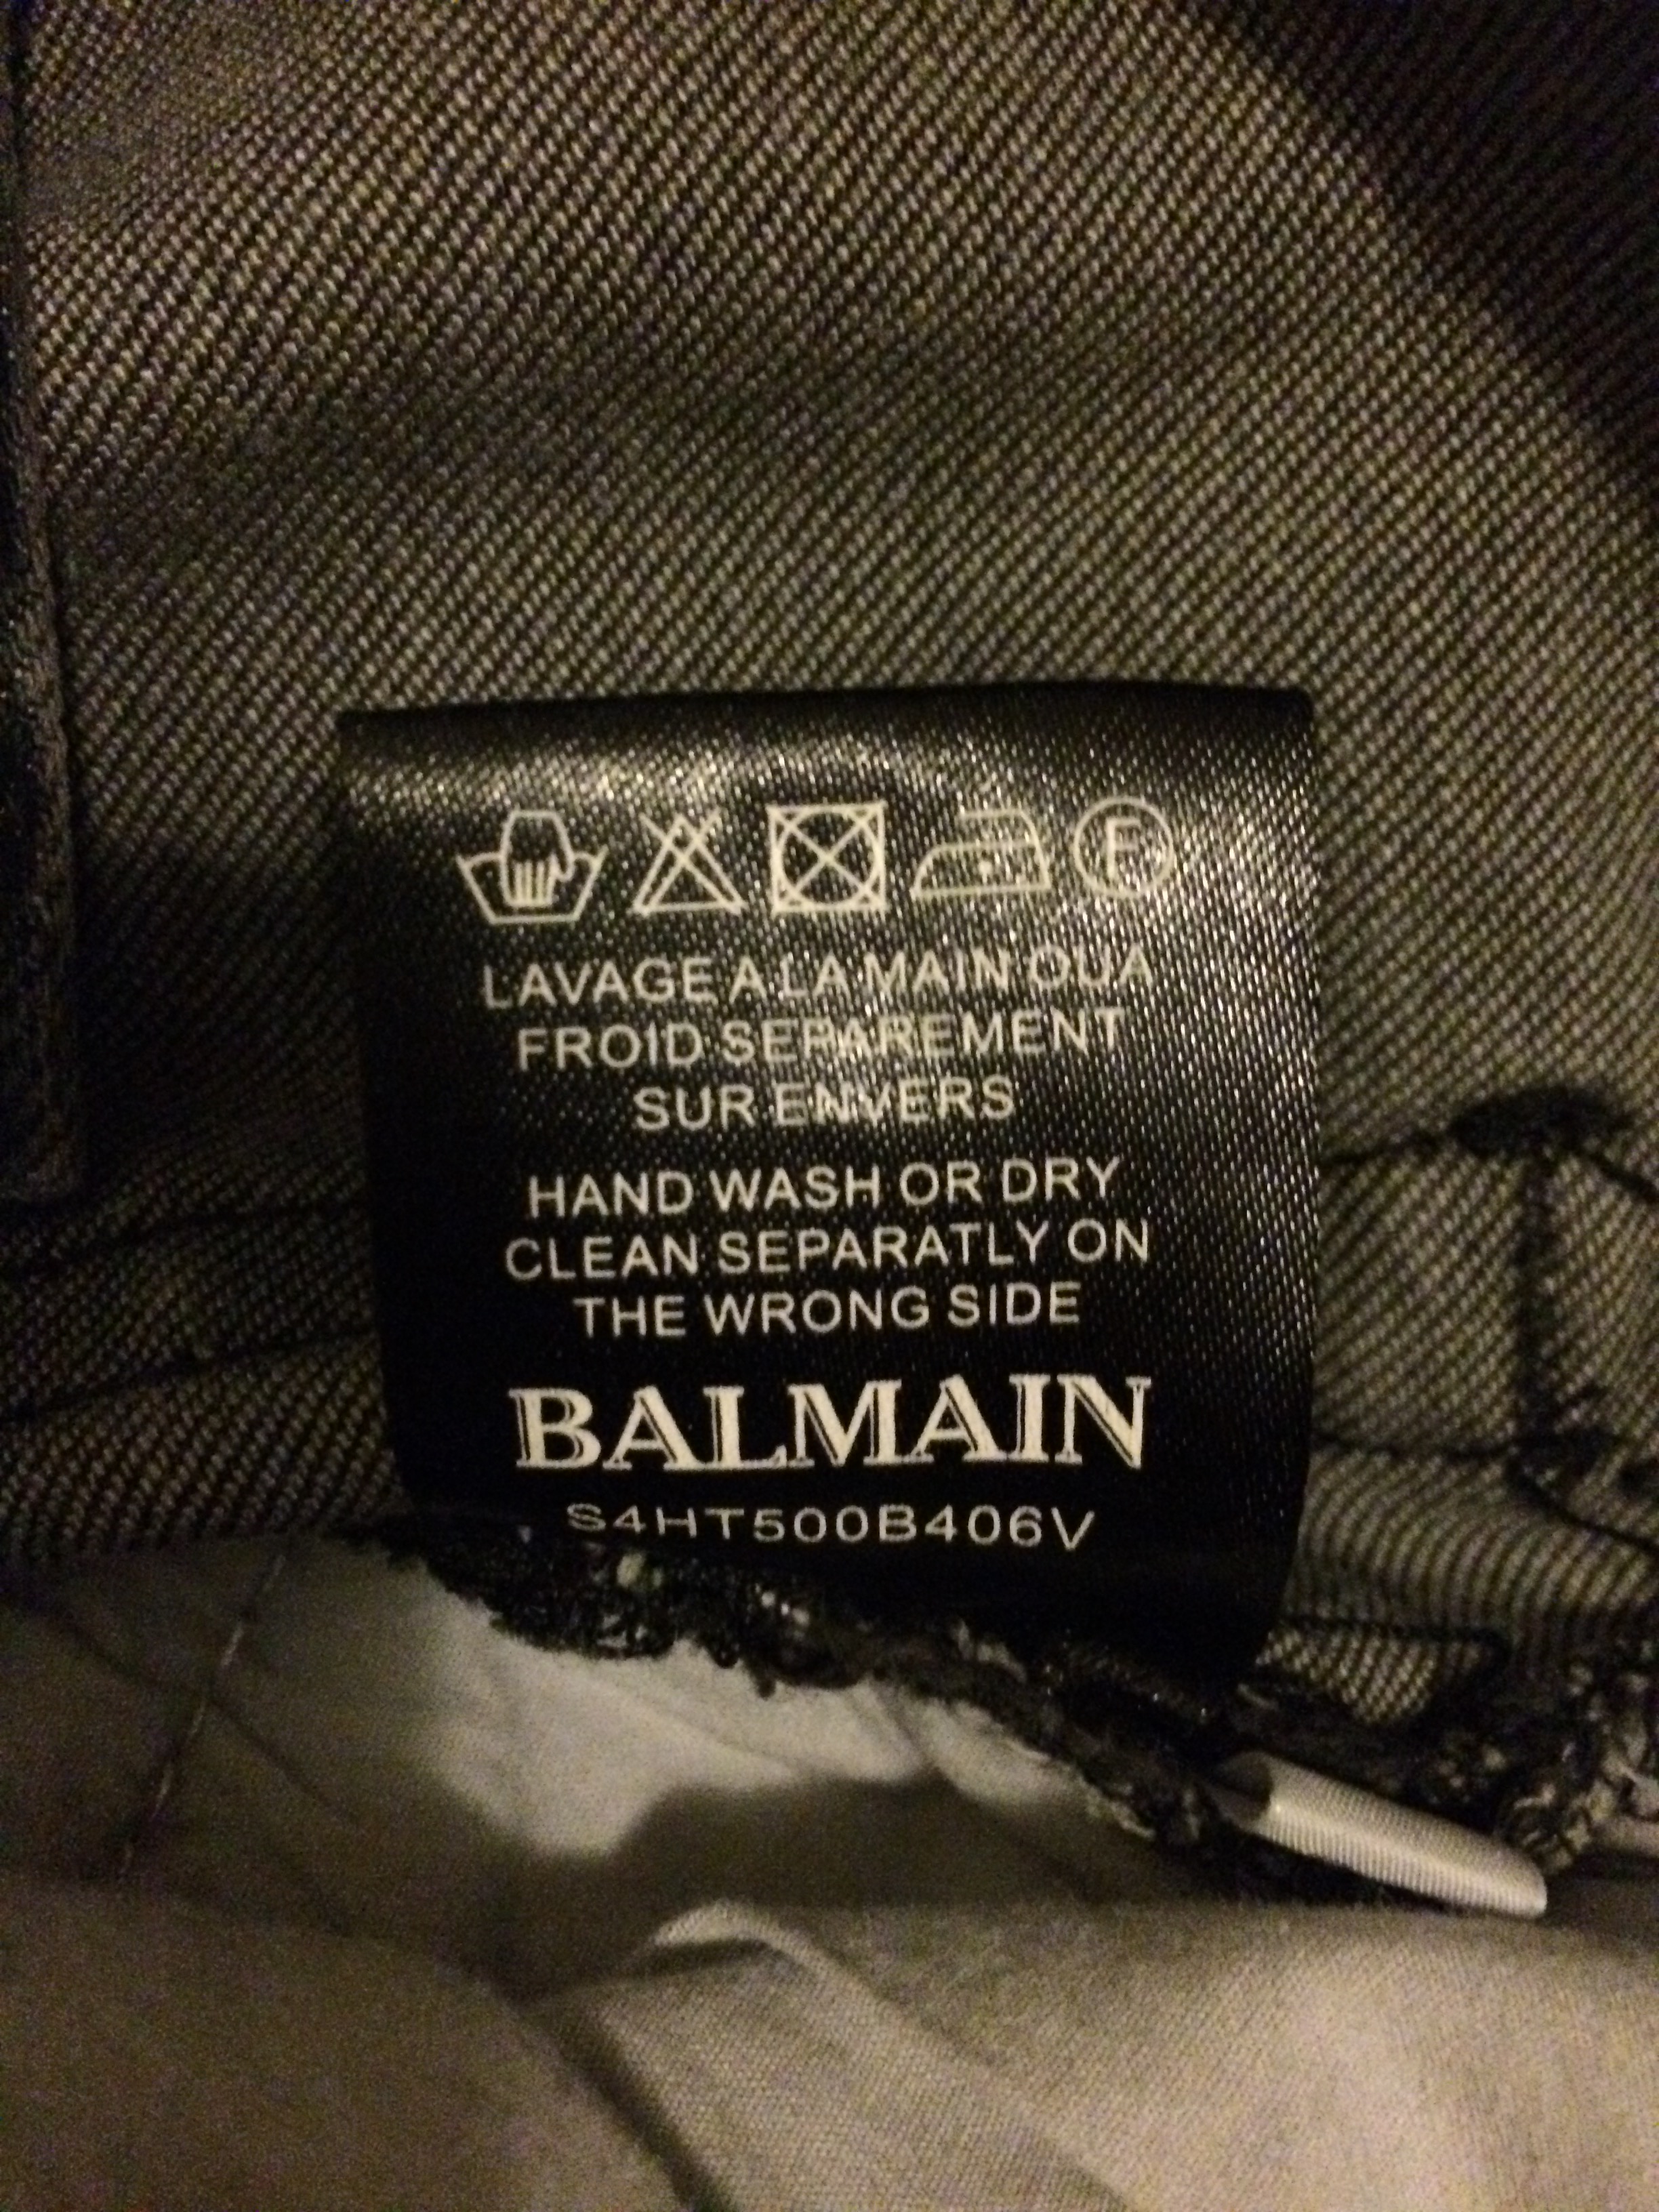 Can you guys tell me if these balmain jeans are fake? | Styleforum